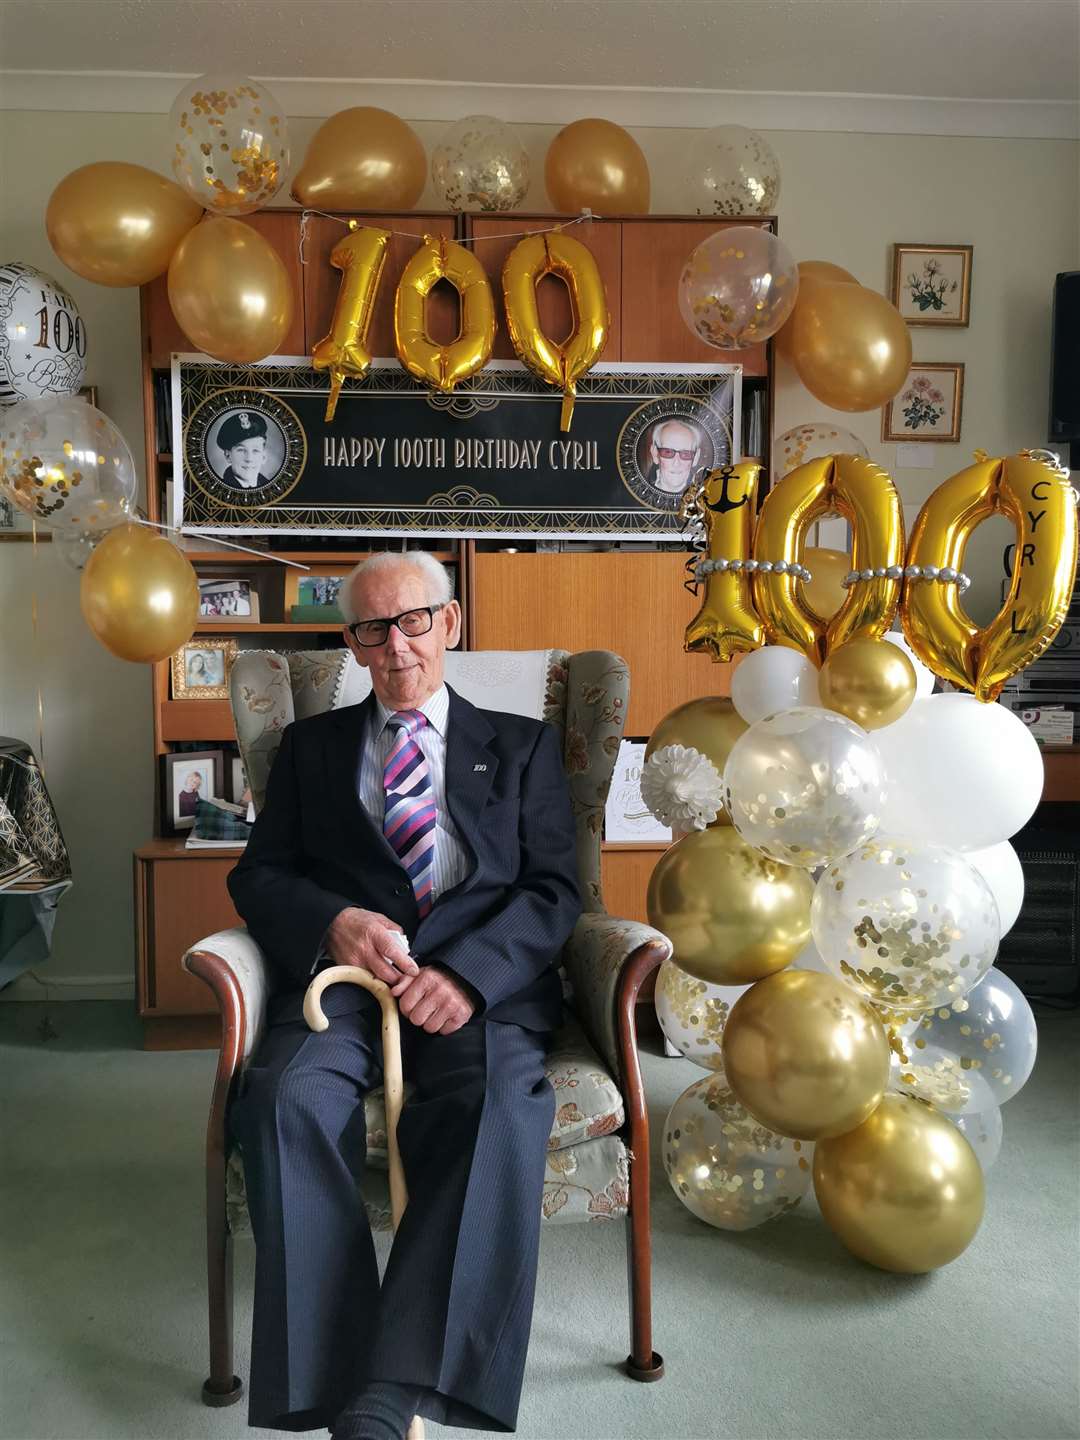 Cyril's family went all out to ensure his 100th birthday was as special as it could be